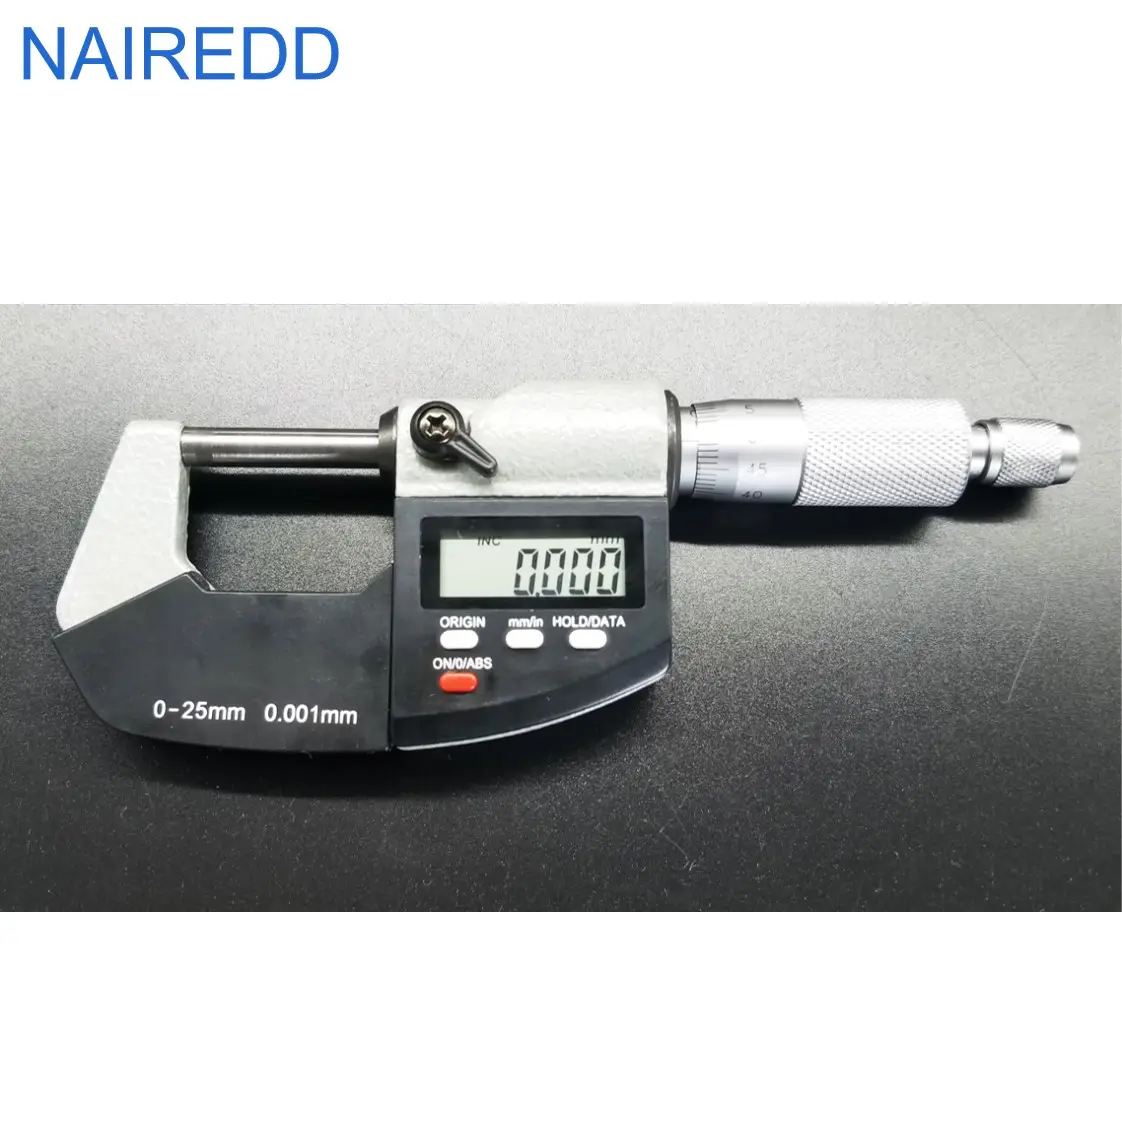 0-25mm 0.001mm High Quality Digital Micrometer Outside Micrometer With Big Screen